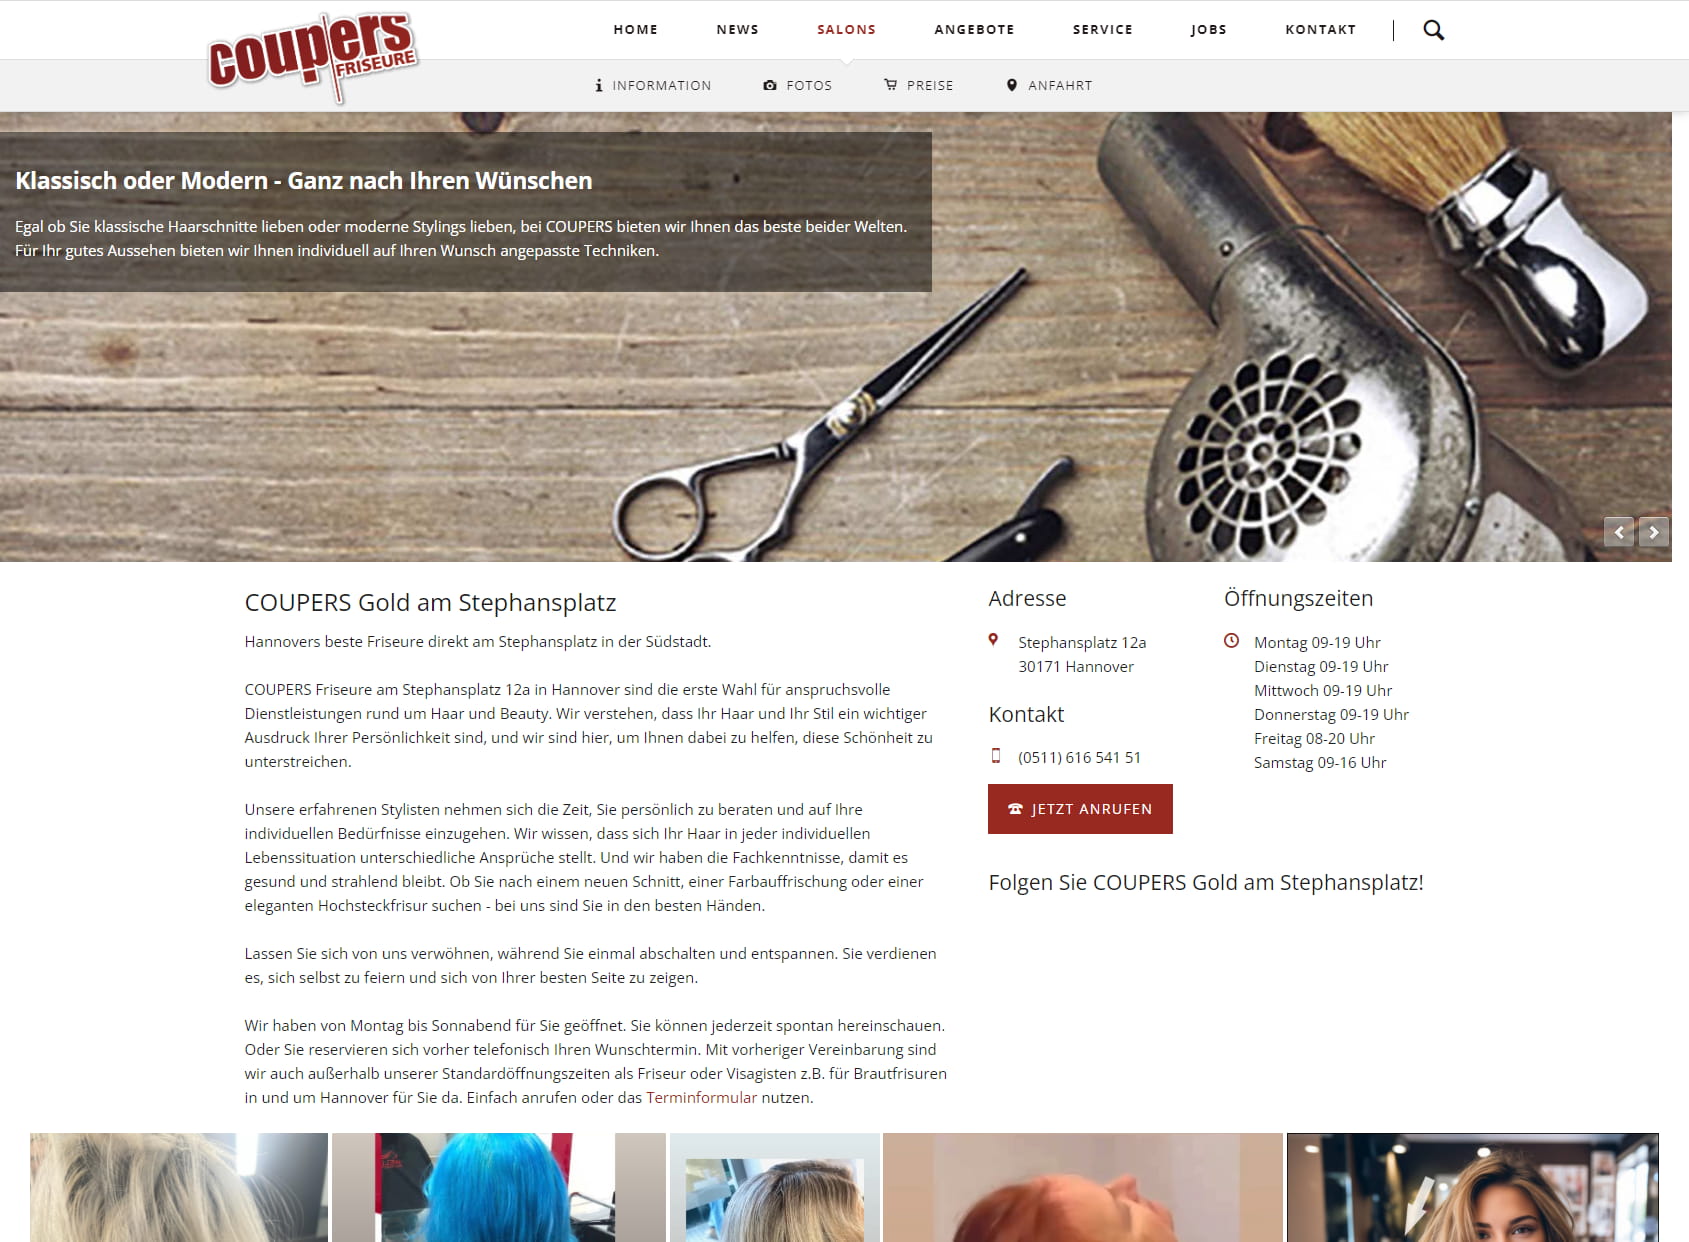 COUPERS Hairdressers - Your hairdresser in the City